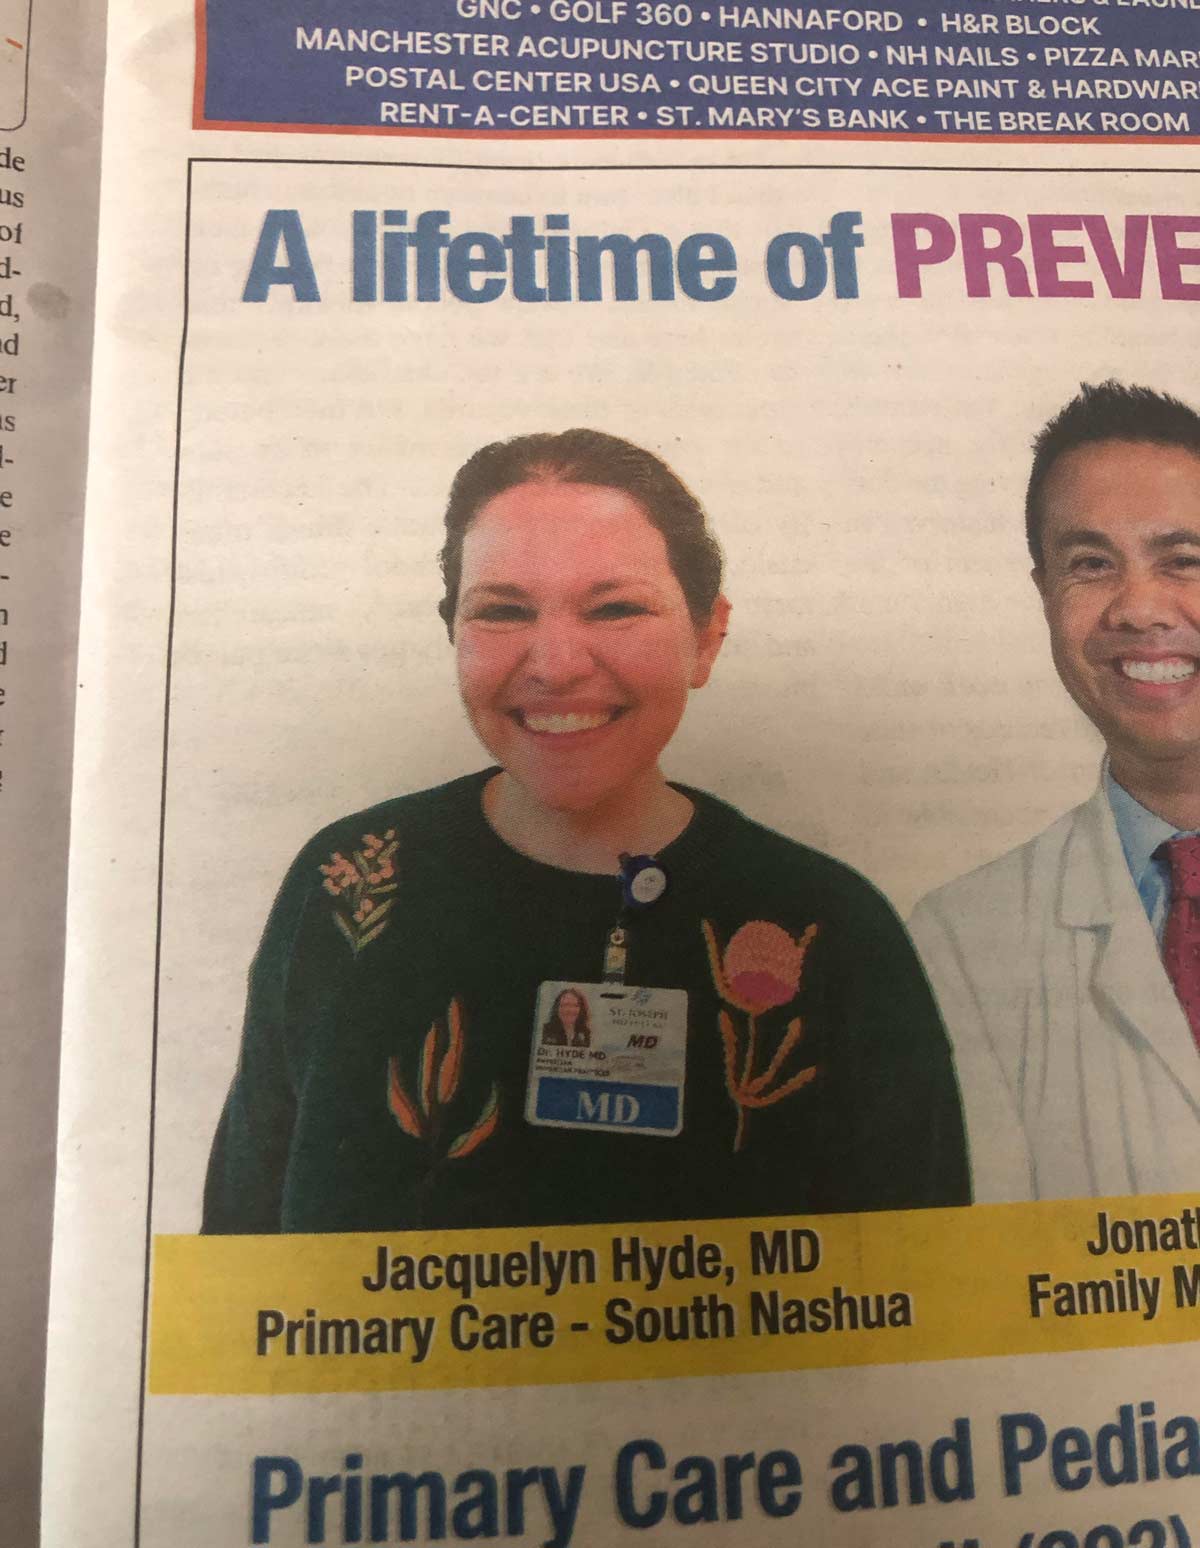 Dr. Jacquelyn Hyde. Just hope you catch her on a good day